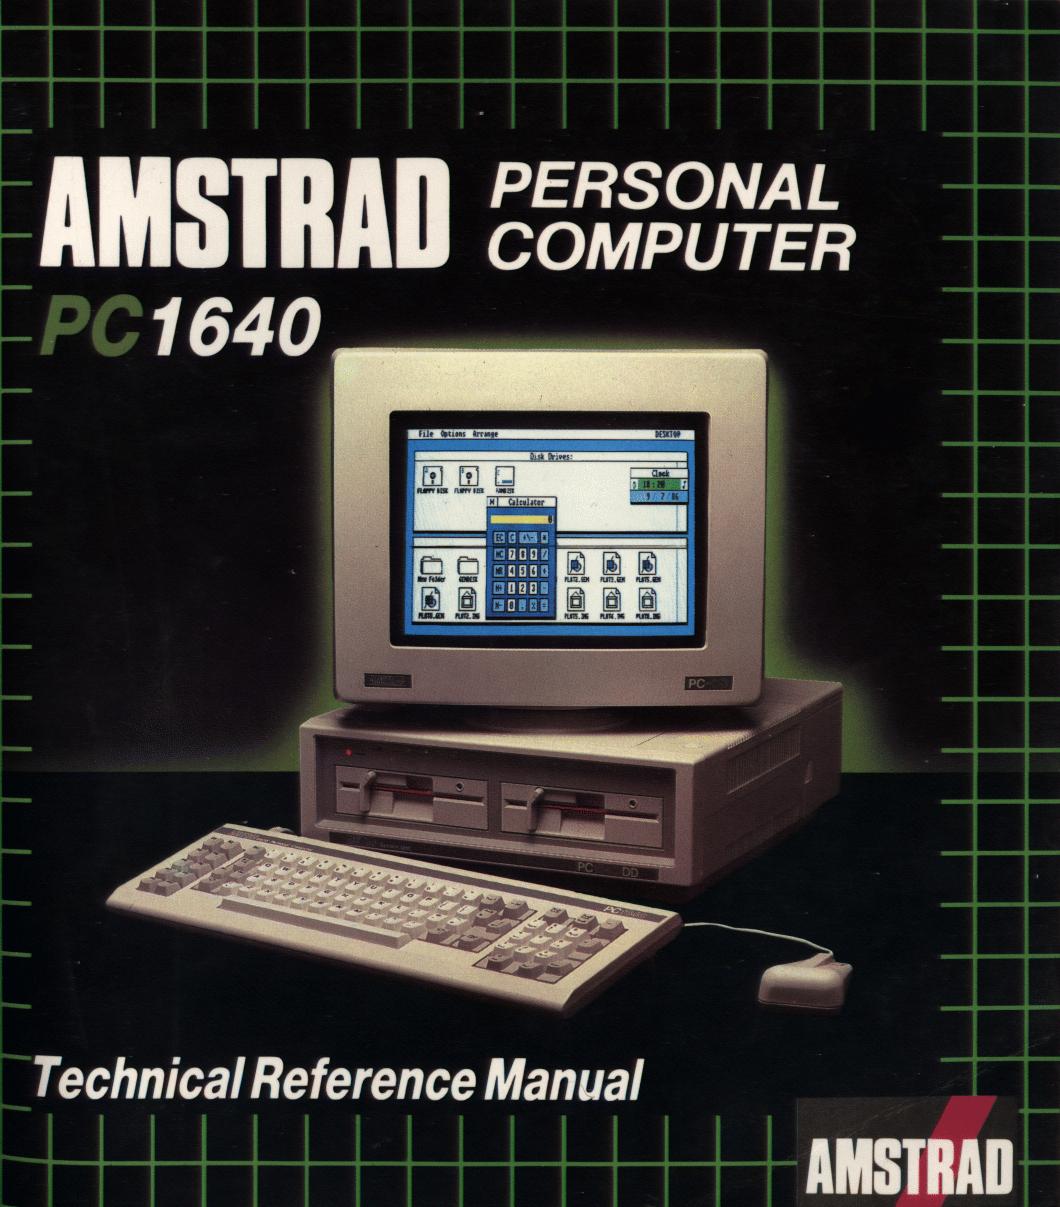 Amstrad PC1640 Technical Reference Manual